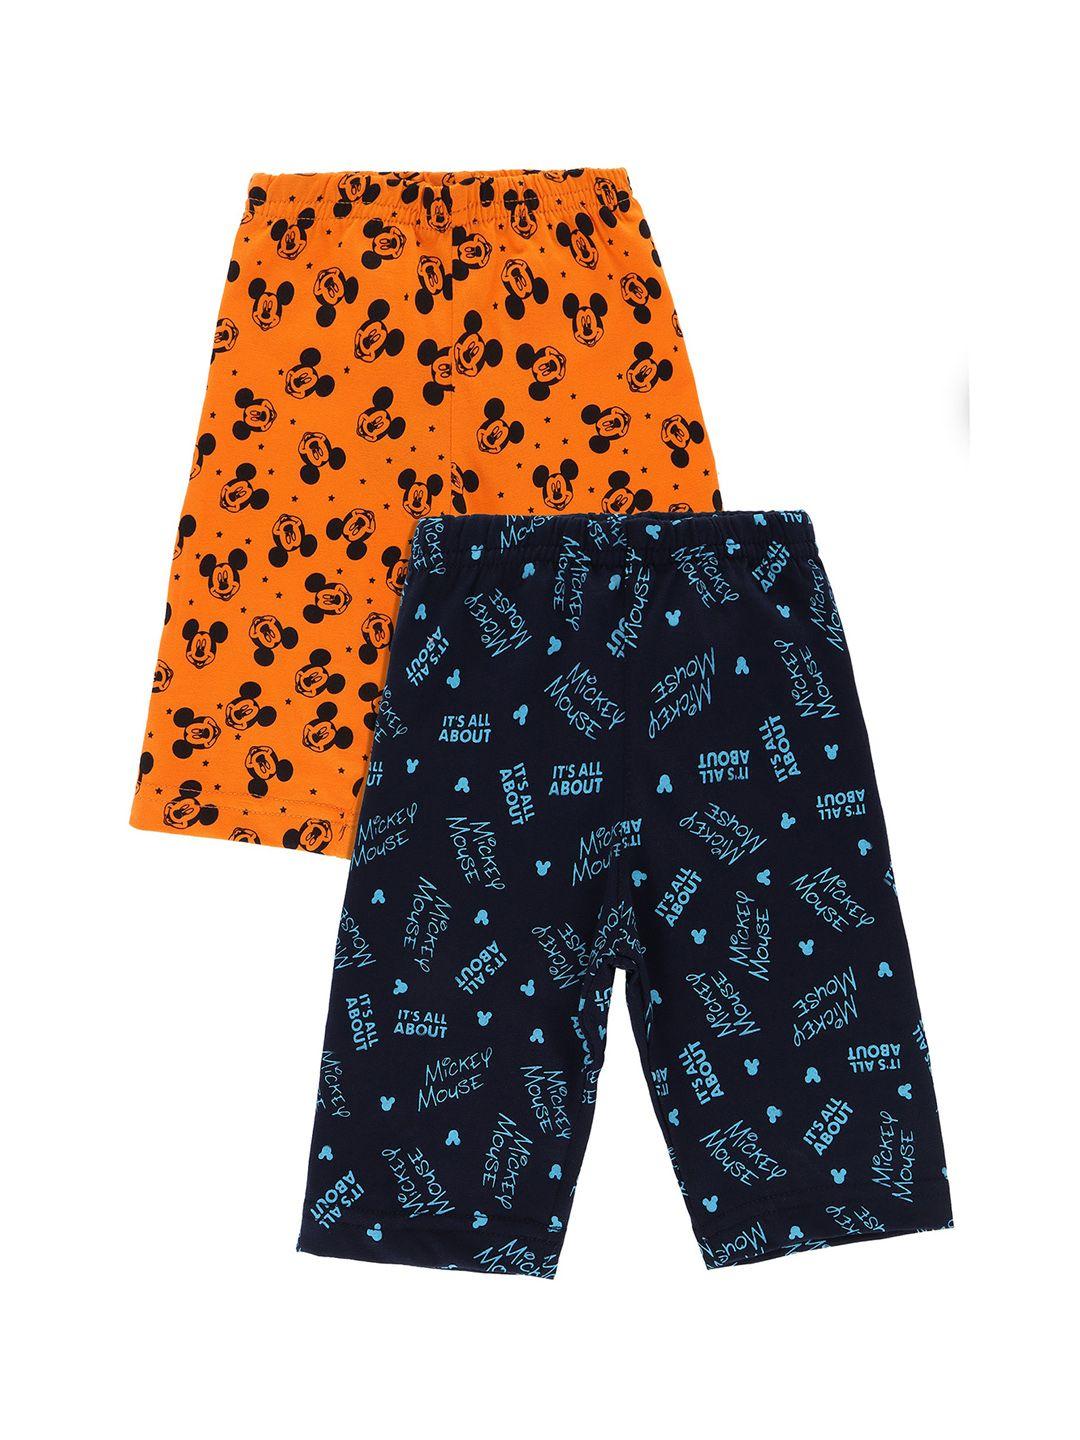 bodycare kids pack of 2 mickey & friends printed cotton shorts